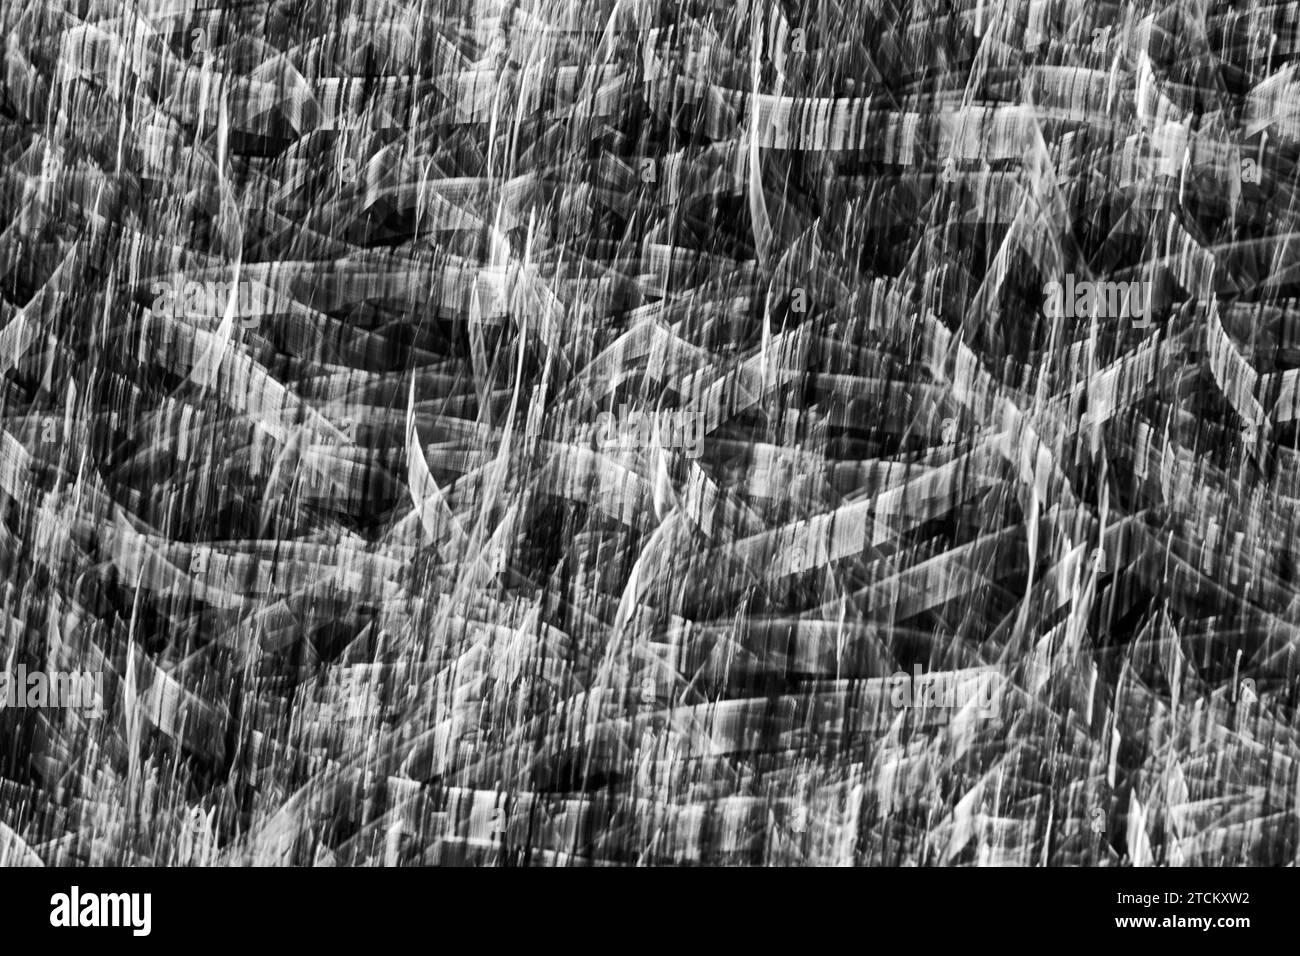 Leaves of Grass, abstract background, wiping effect, bulb exposure Stock Photo